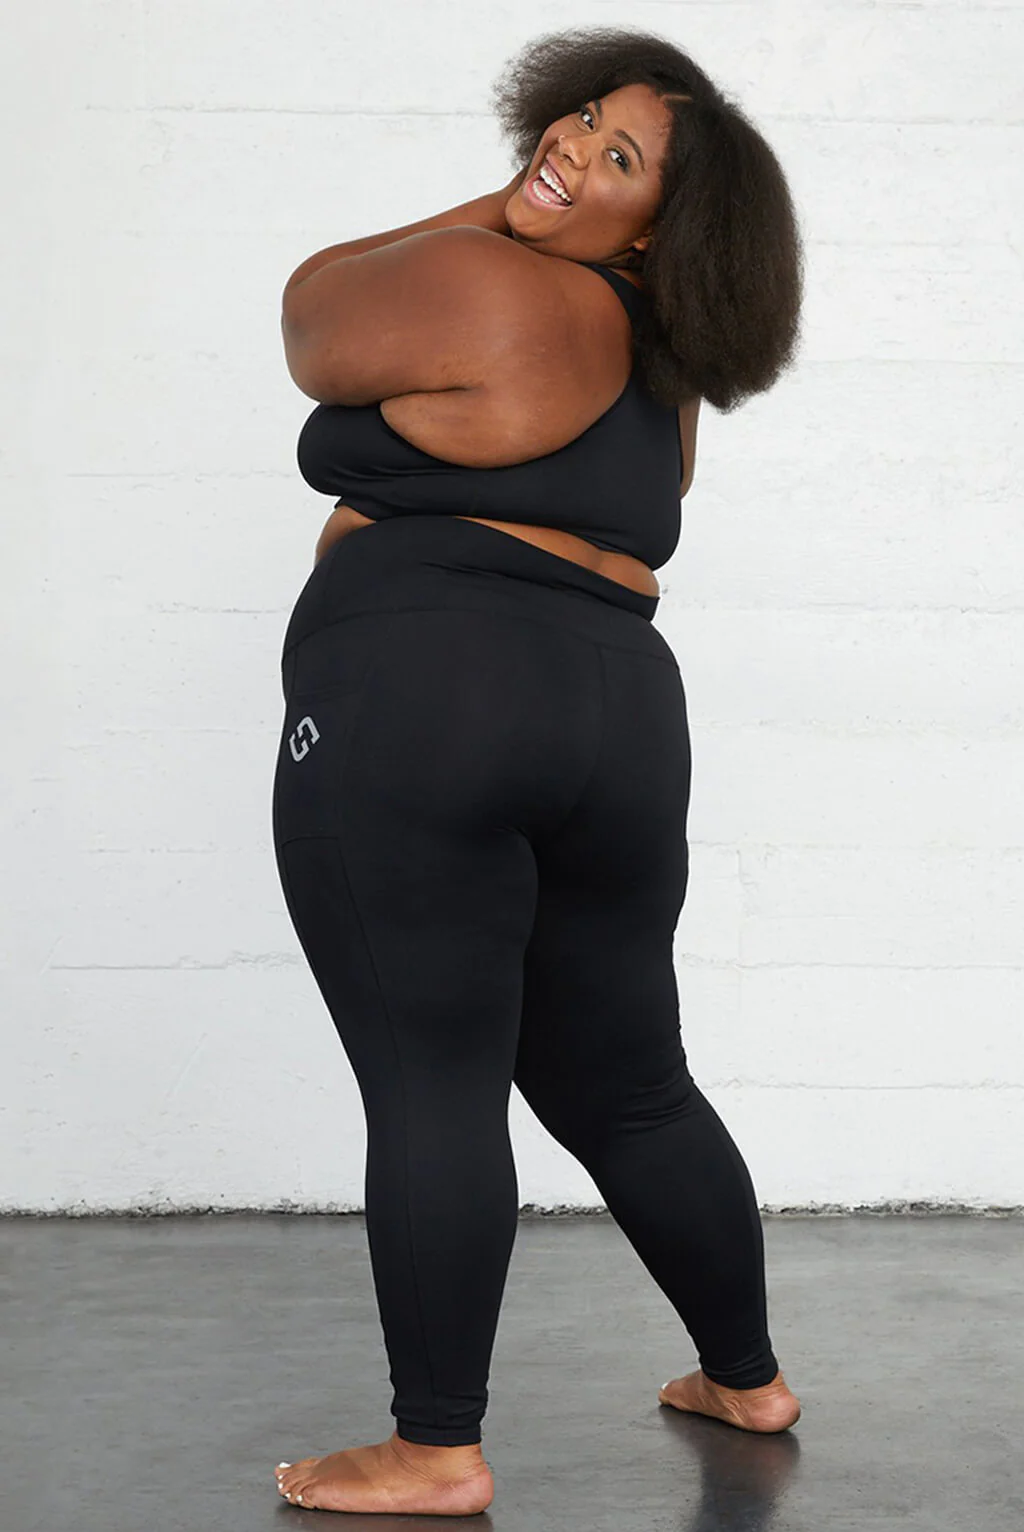 10 Plus-Size Leggings for Women Who Love Their Curves